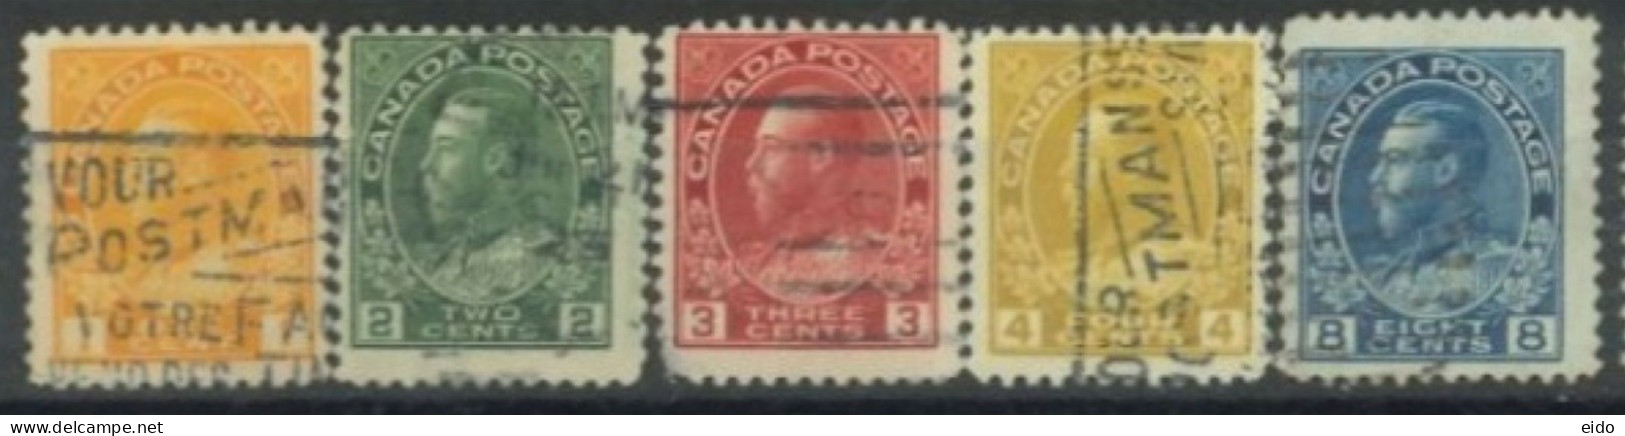 CANADA - 1922, KING GEORGE V STAMPS SET OF 5, USED. - Usati